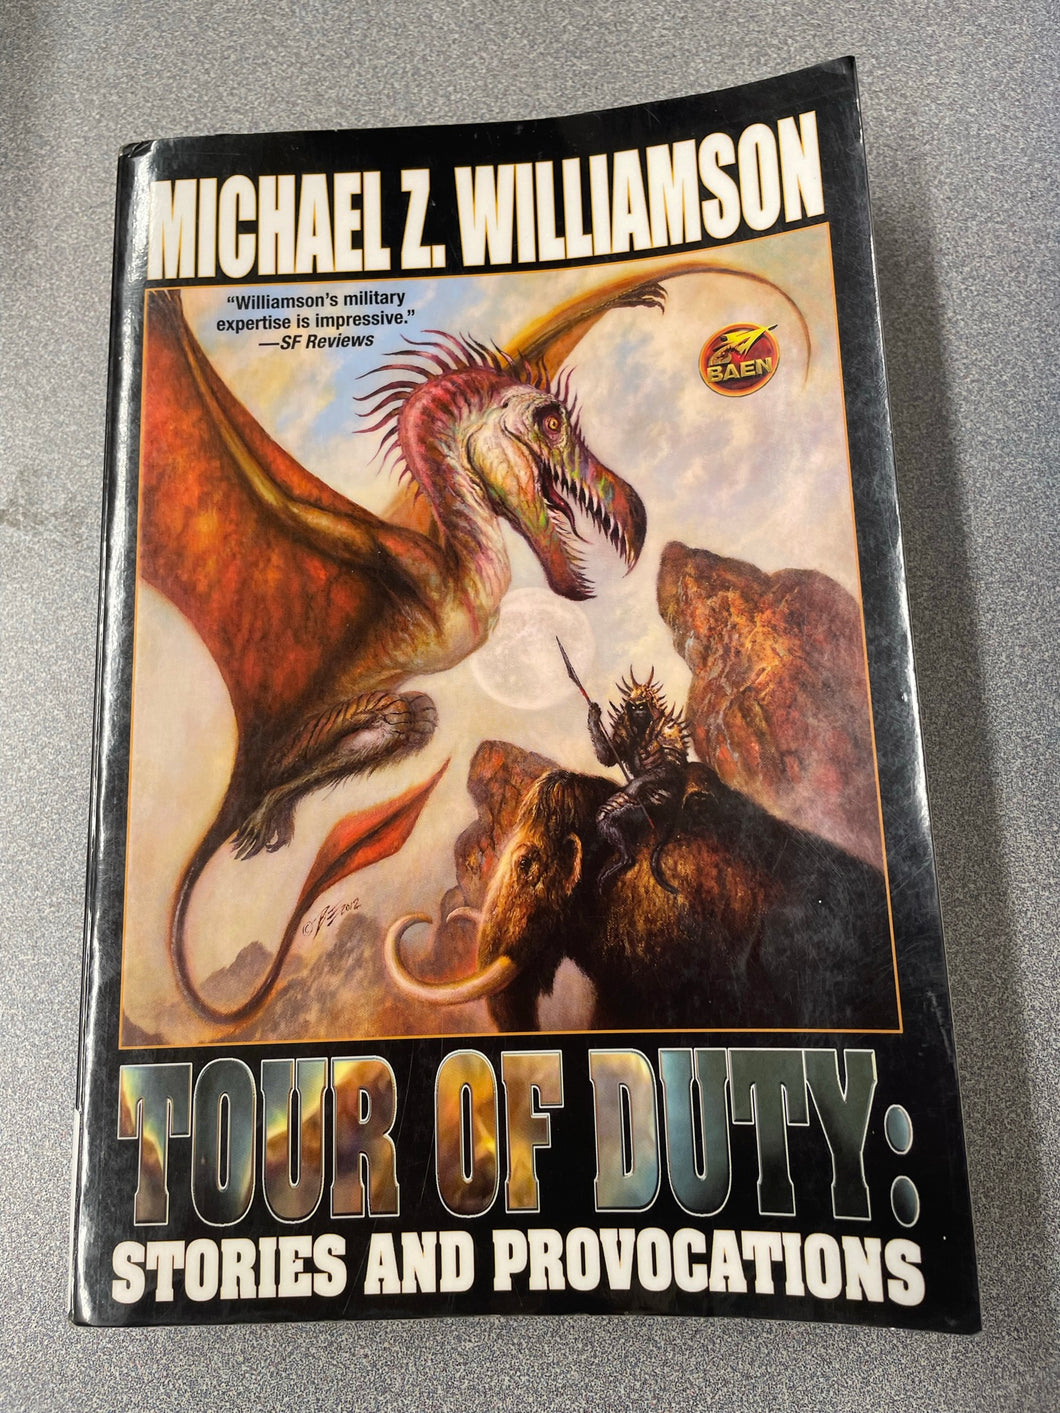 Williamson, Michael Z., Tour of Duty: Stories and Provocations [2013] SF 9/23